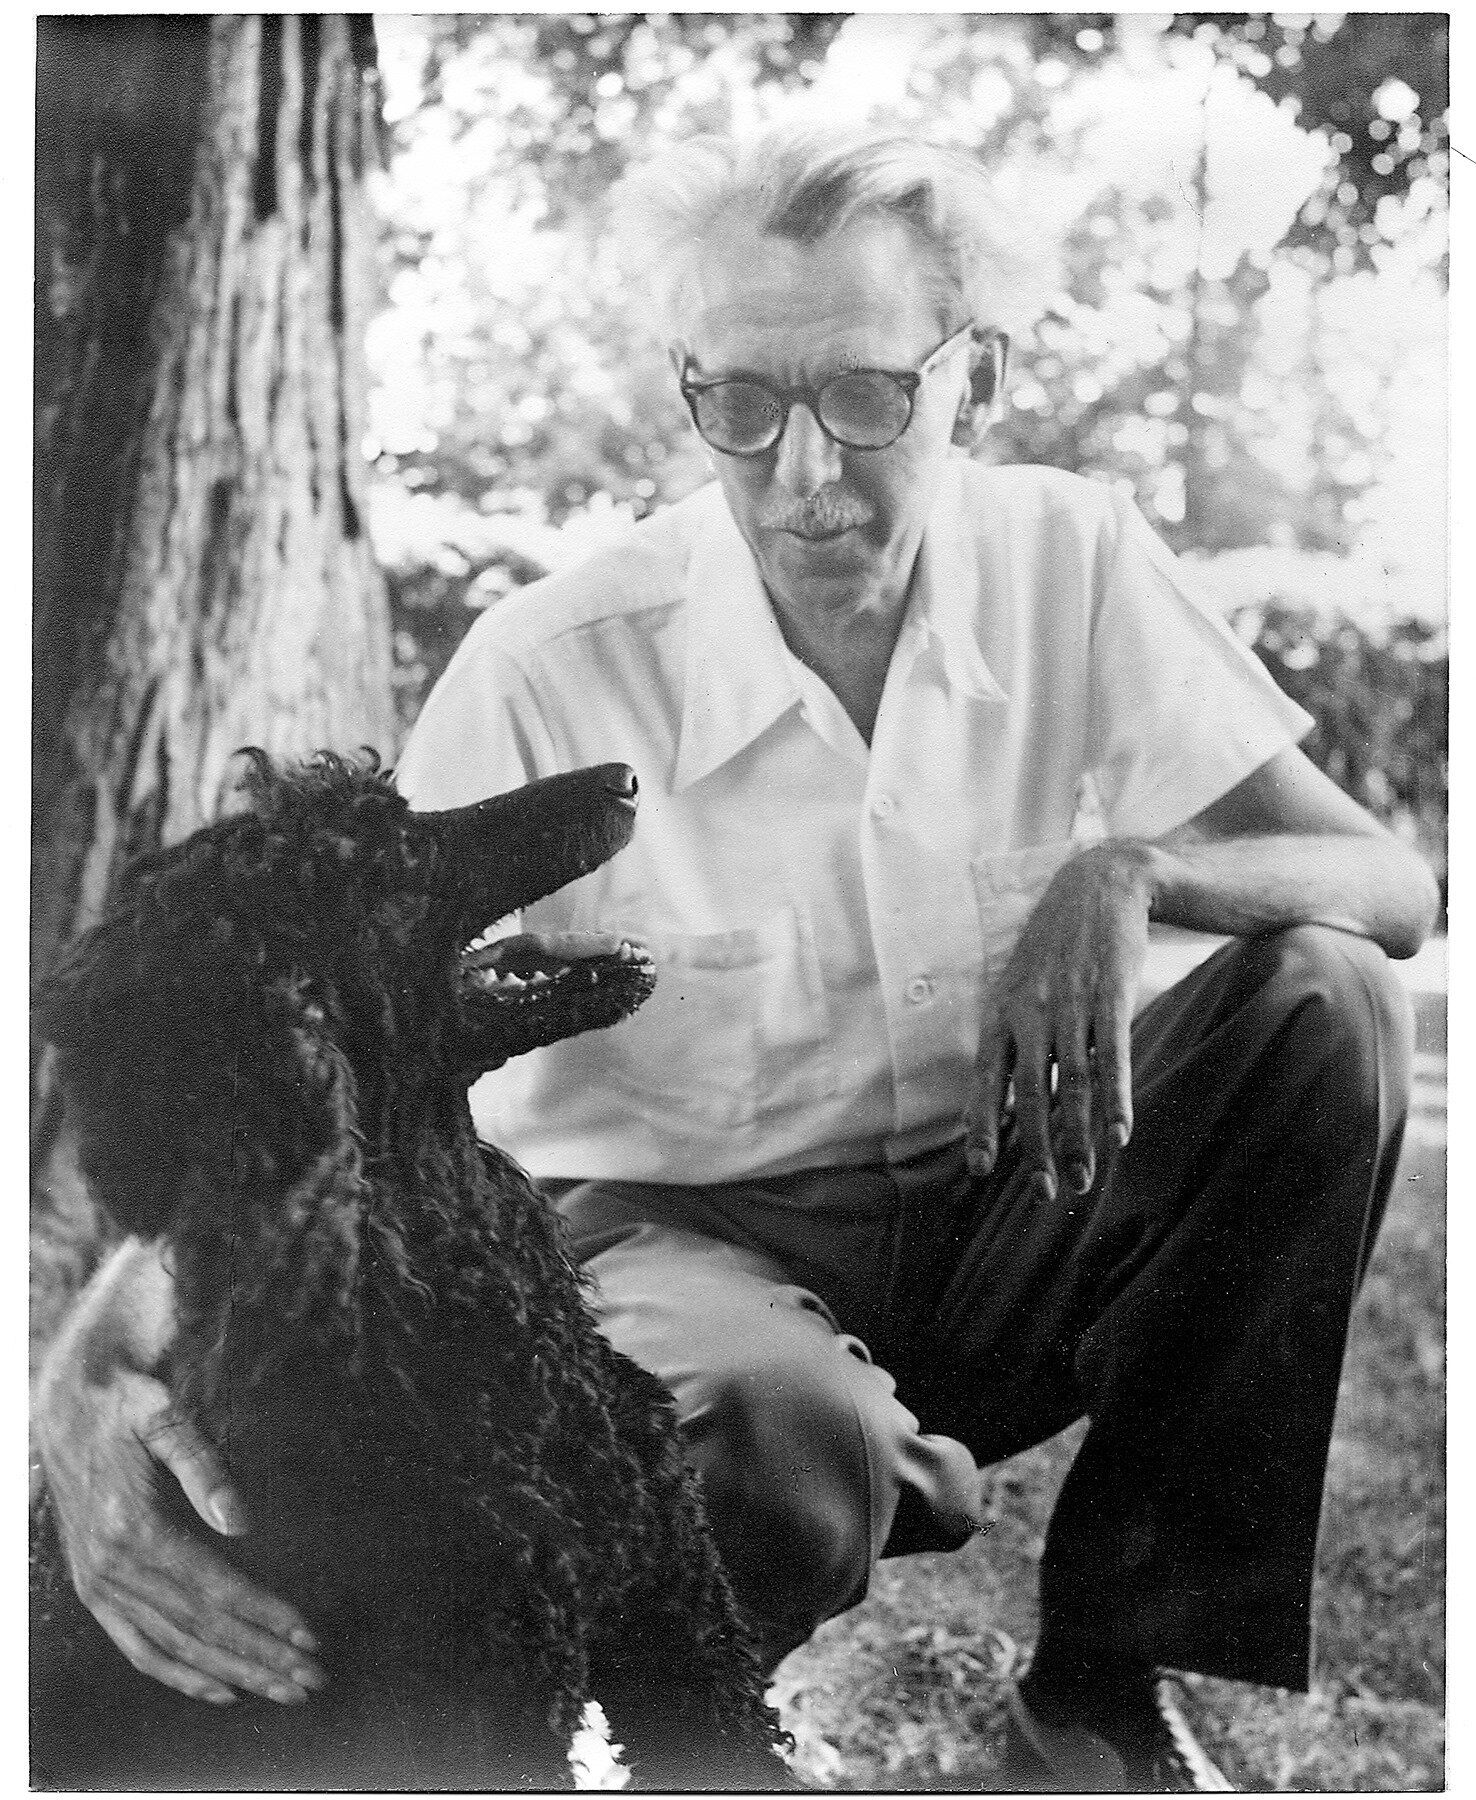   Thurber with His Beloved Christabel   © The Thurber Estate  